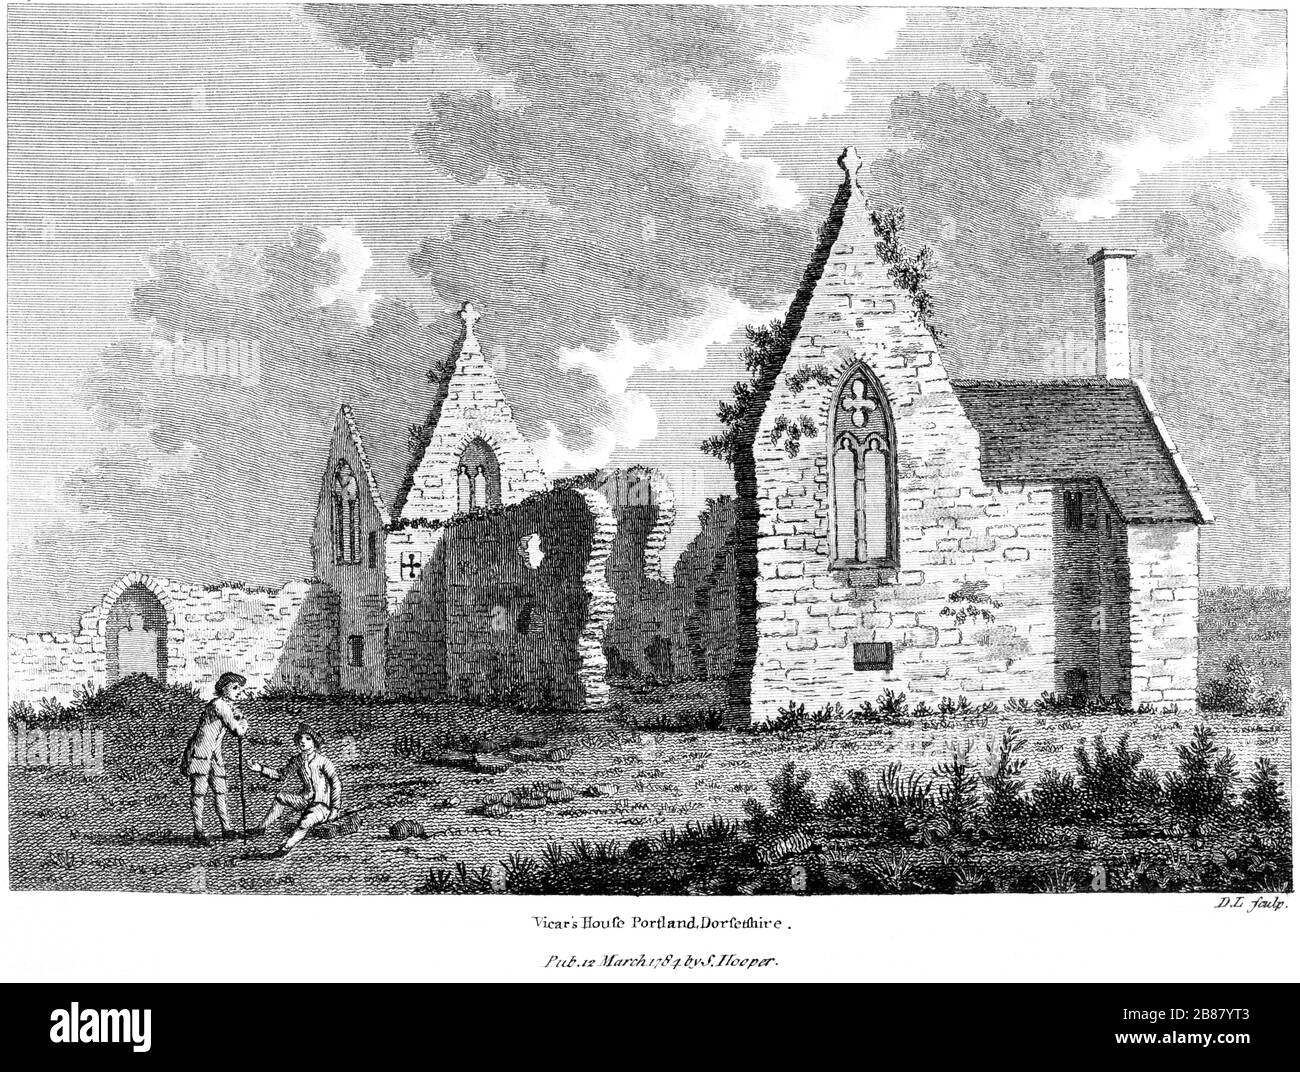 An engraving of Vicars House Portland, Dorsetshire scanned at high resolution from a book published in 1784.  Believed copyright free. Stock Photo